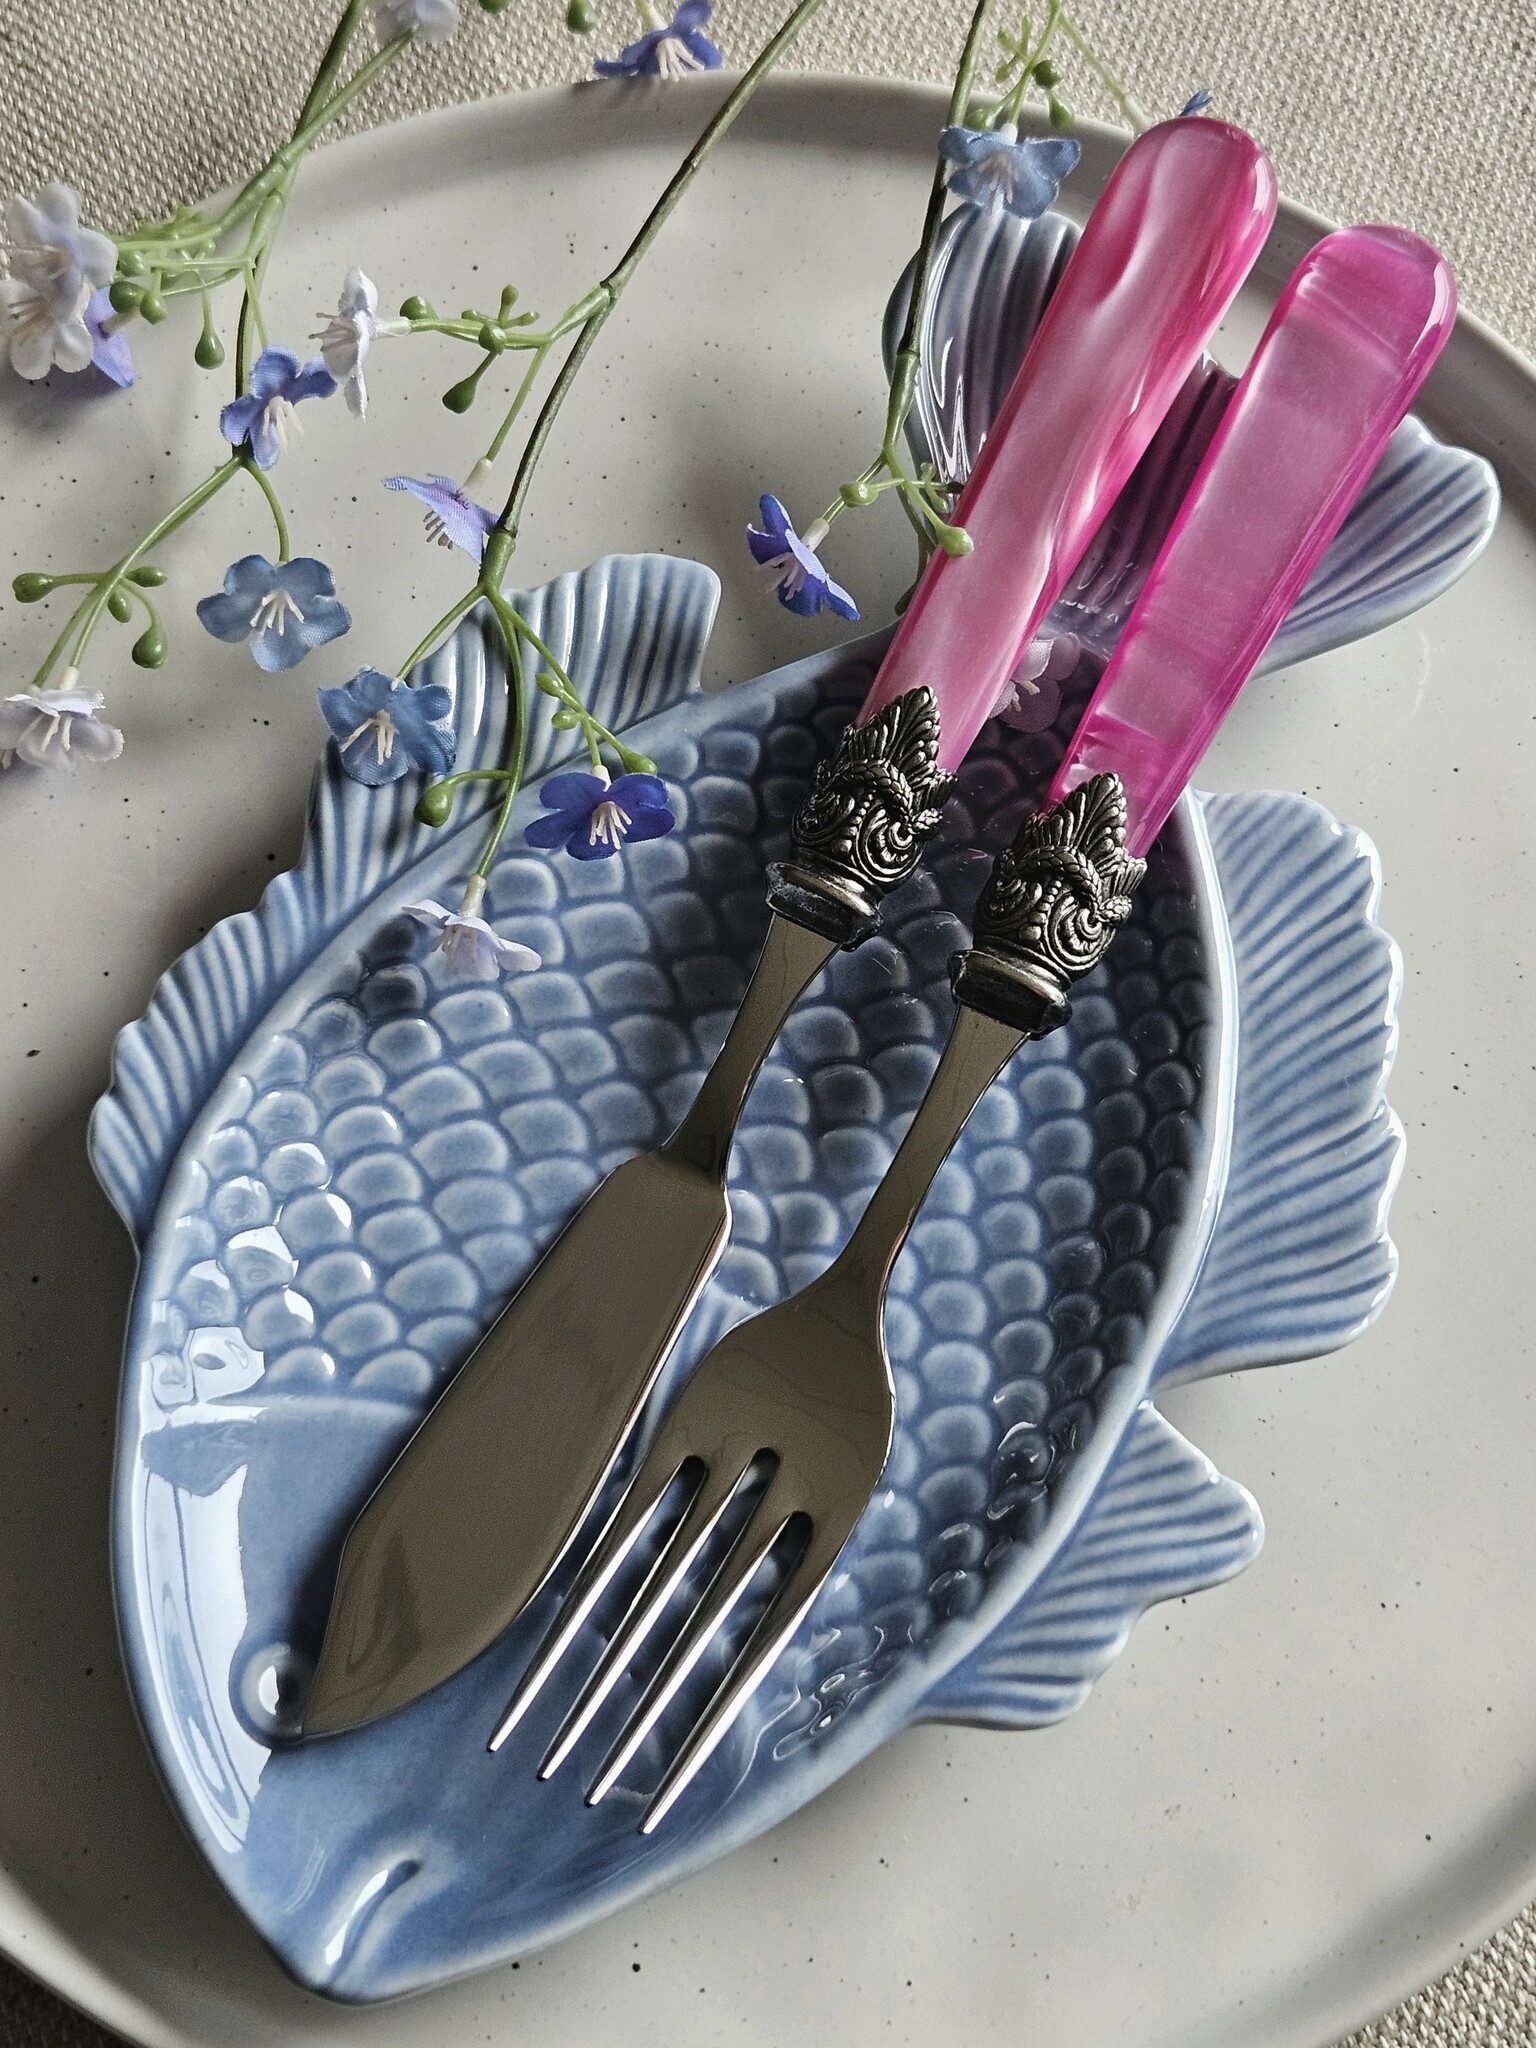 Fish cutlery, Fuchsia with Mother of Pearl, for 1 person, EME